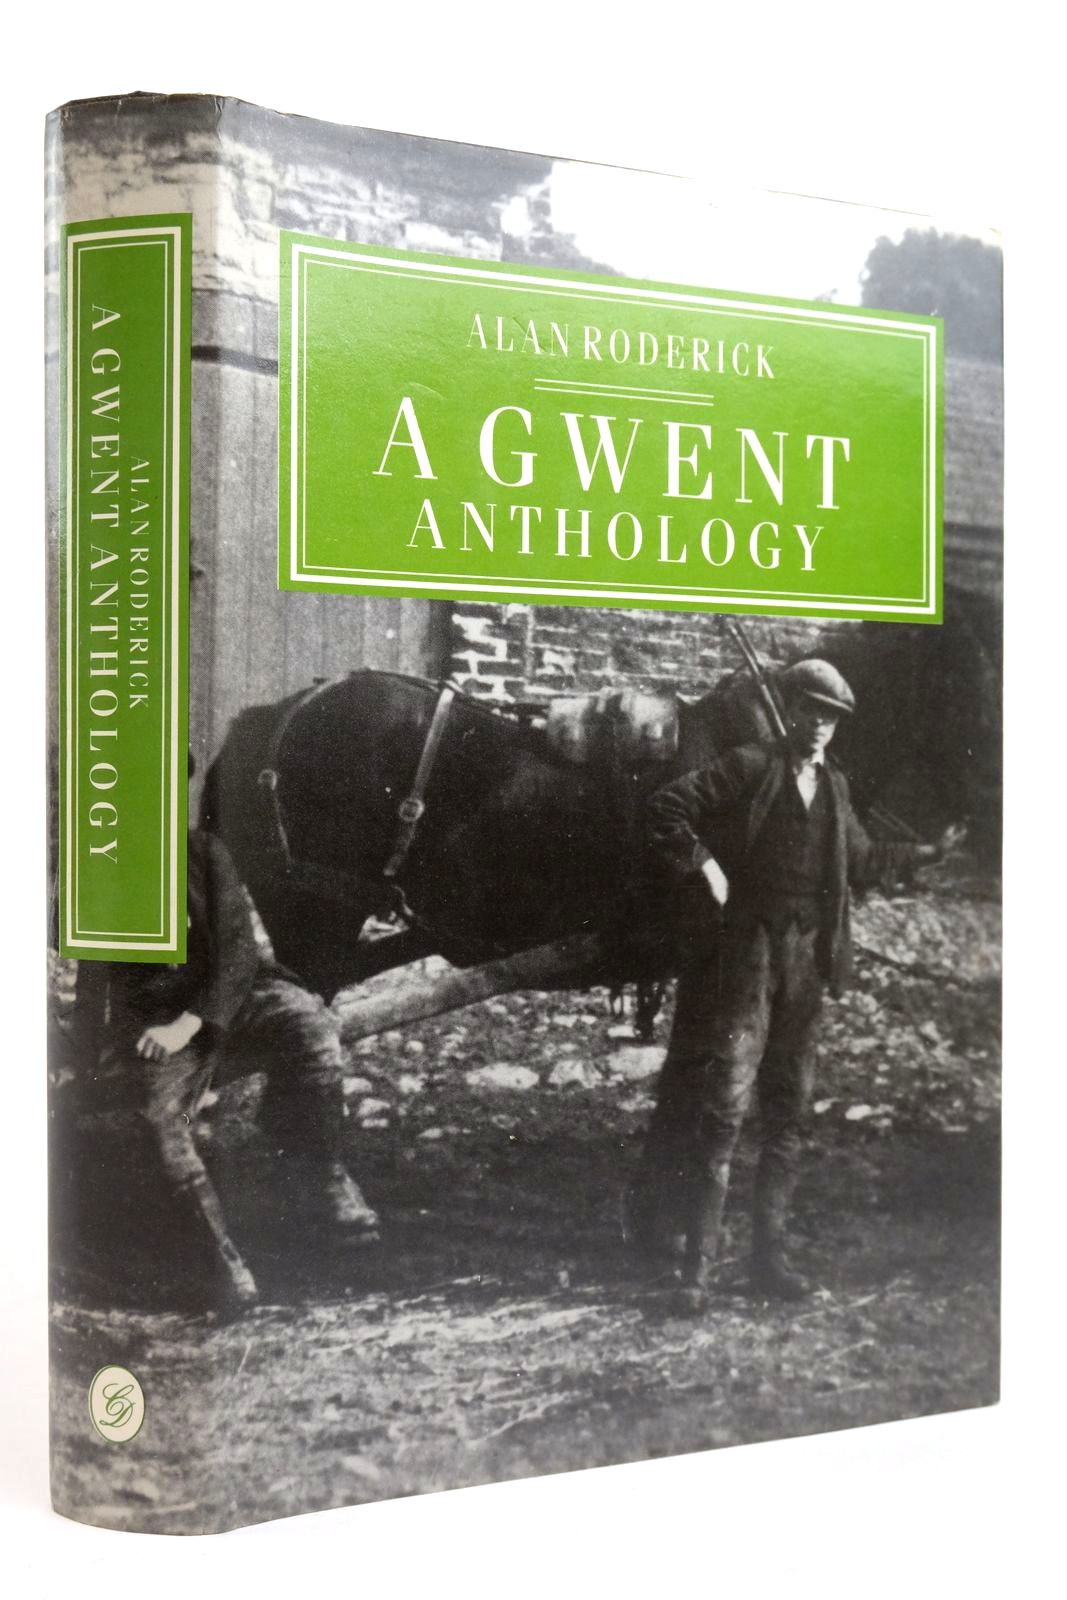 Photo of A GWENT ANTHOLOGY written by Roderick, Alan published by Christopher Davies (STOCK CODE: 2135438)  for sale by Stella & Rose's Books